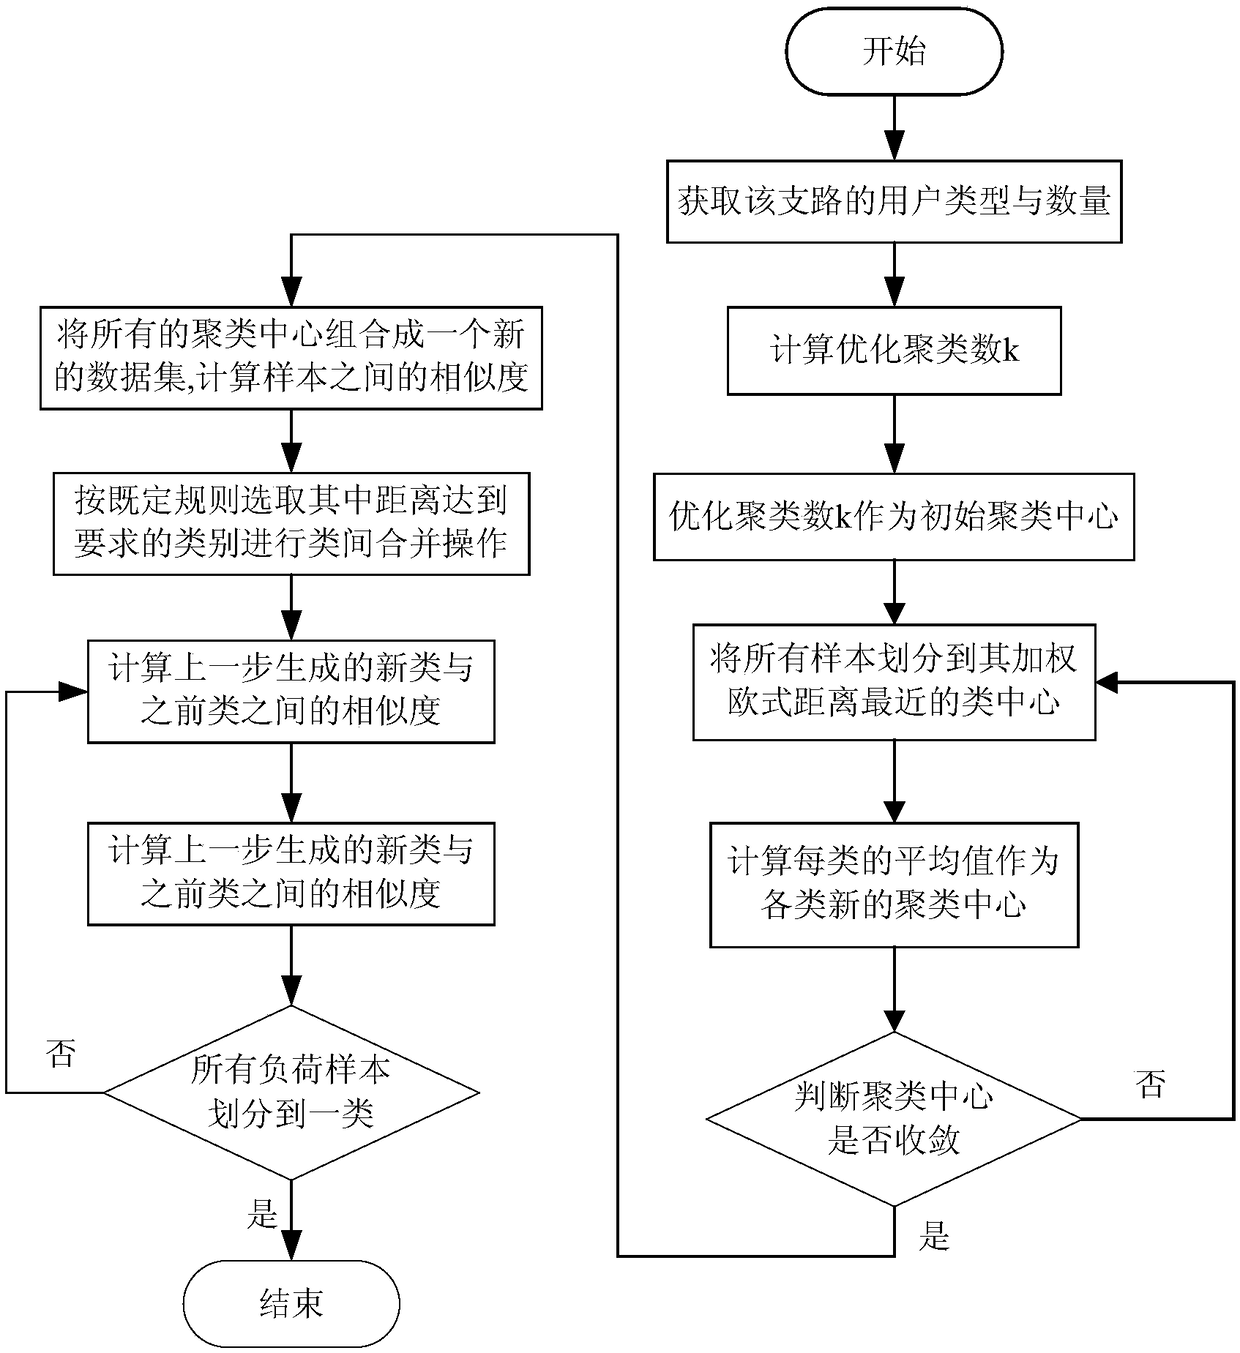 Urban electric vehicle charging decision-making method based on typical load dynamic game